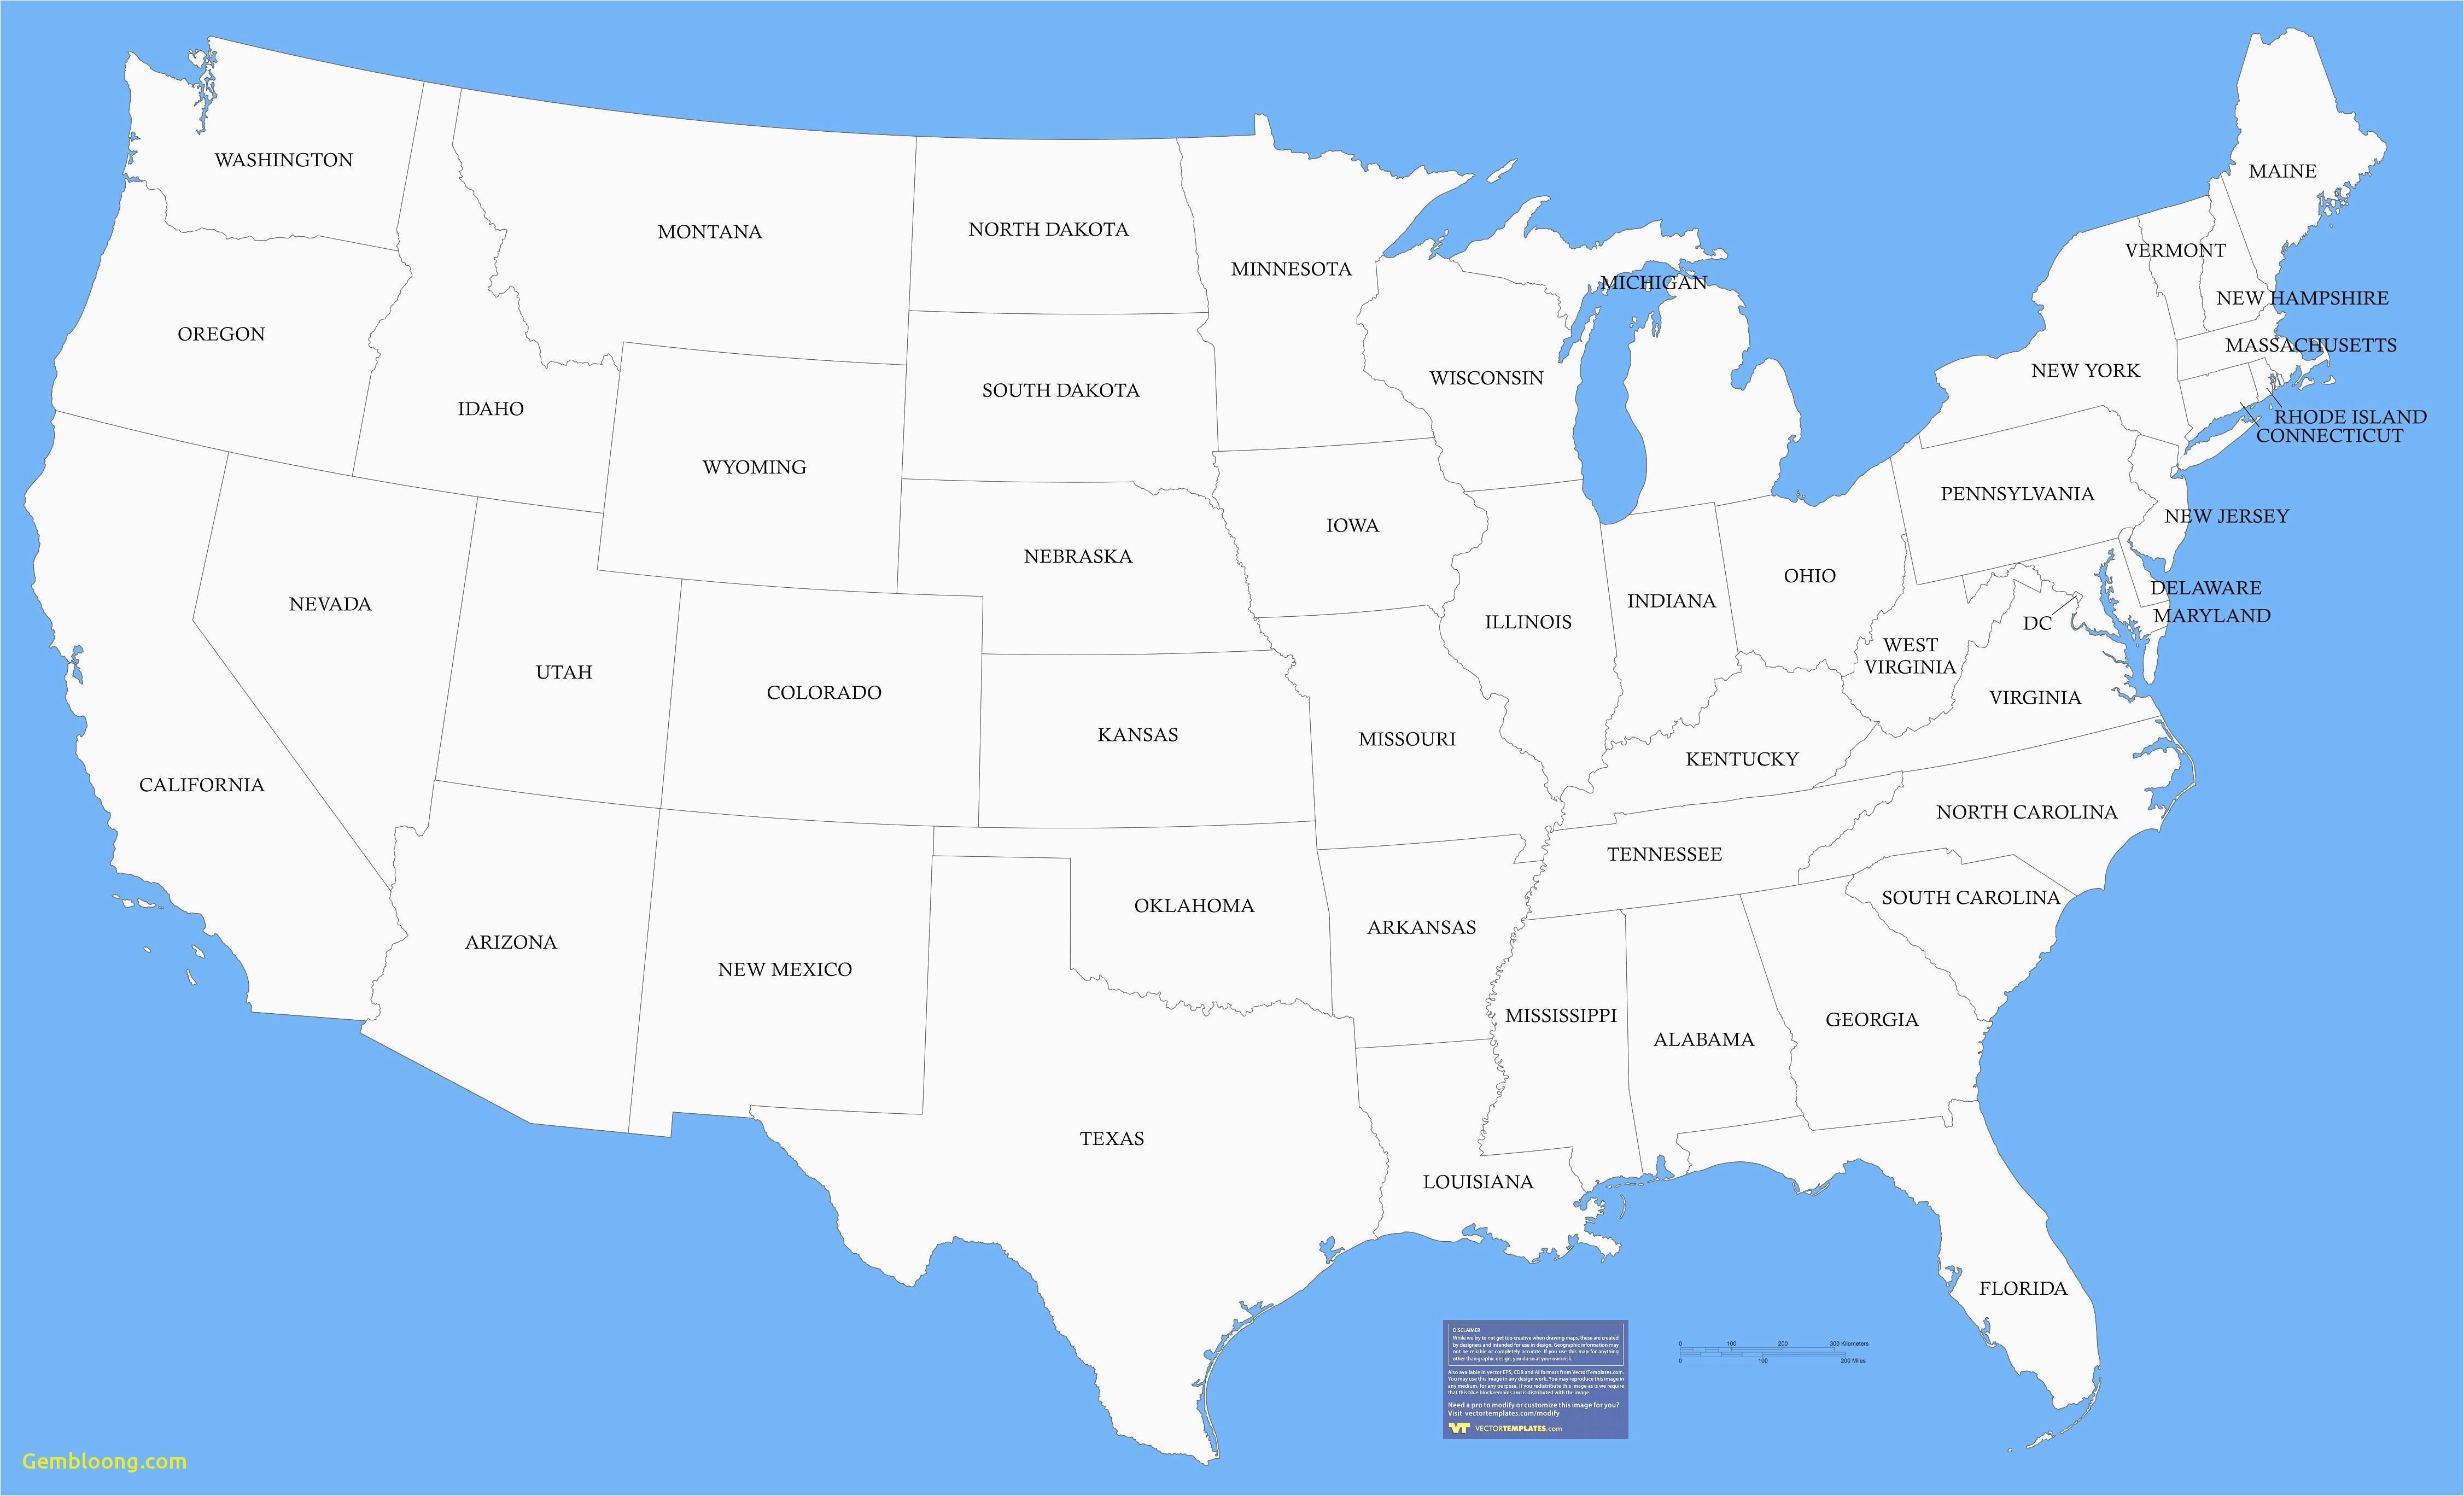 Map Of State Of Georgia with Cities United States Map East Coast Refrence Us Canada Map with Cities